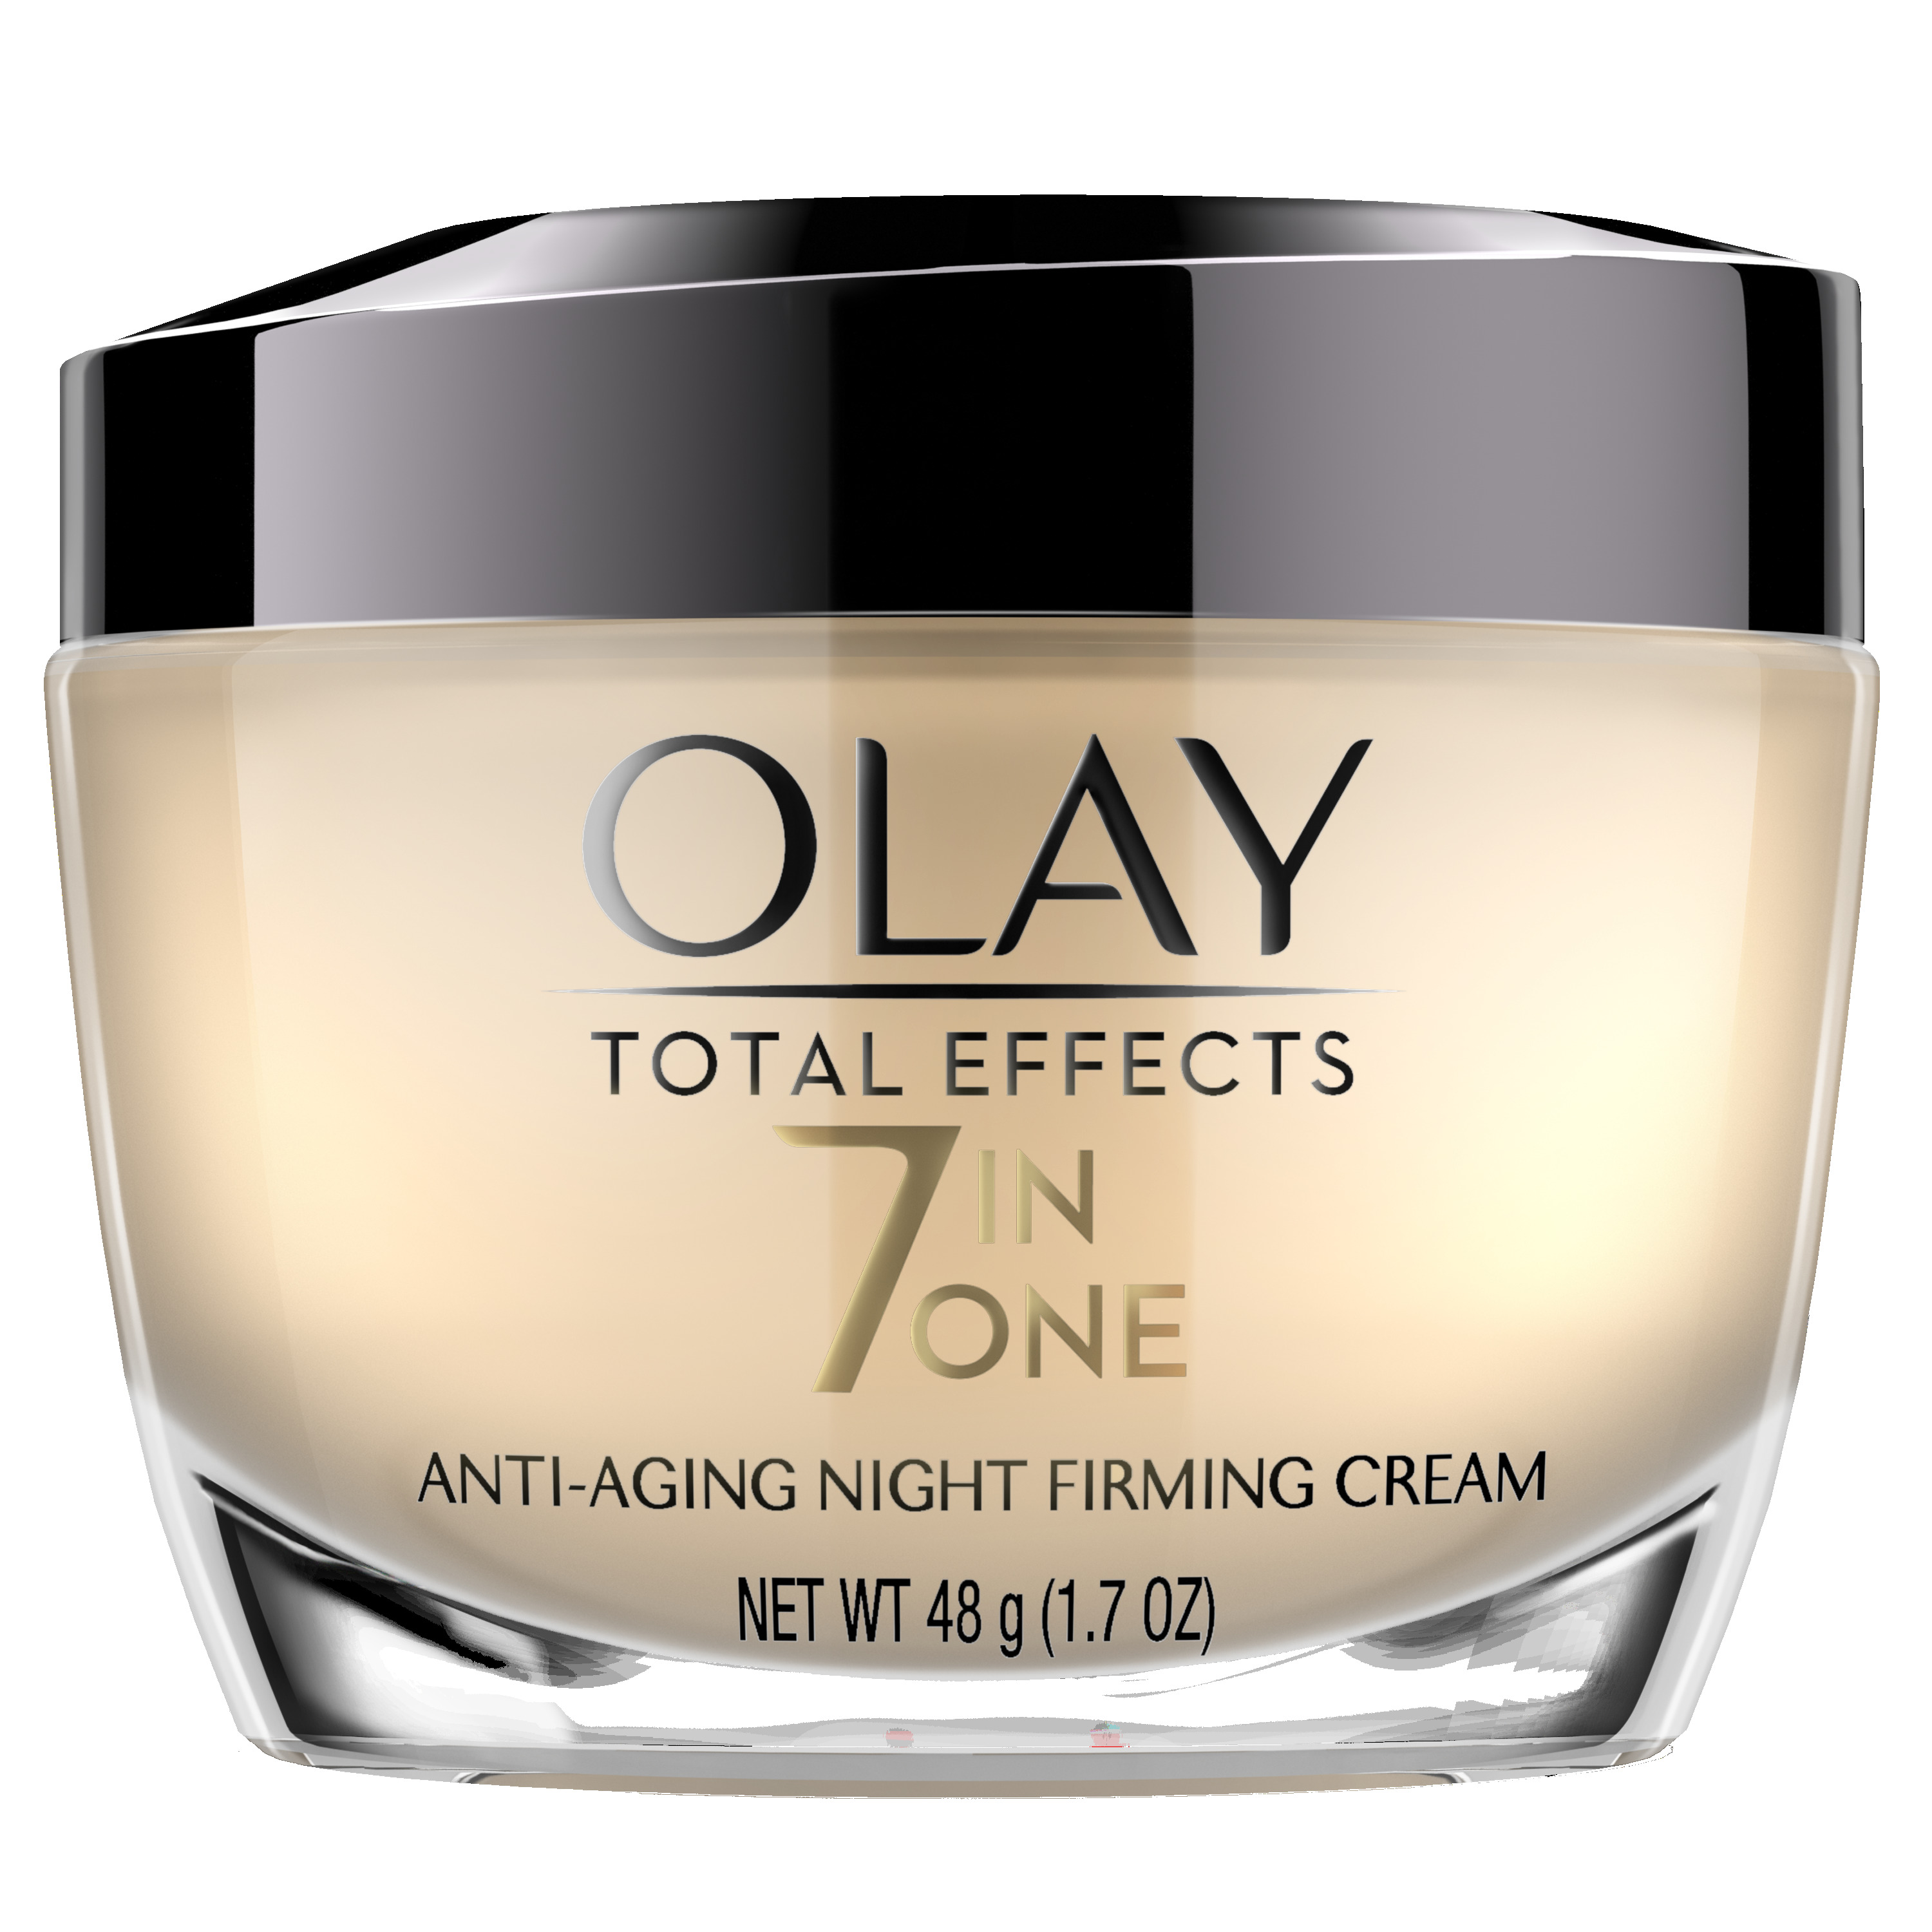 Olay Total Effects 7 In 1 Anti Aging Firming Night Cream Ingredients Explained